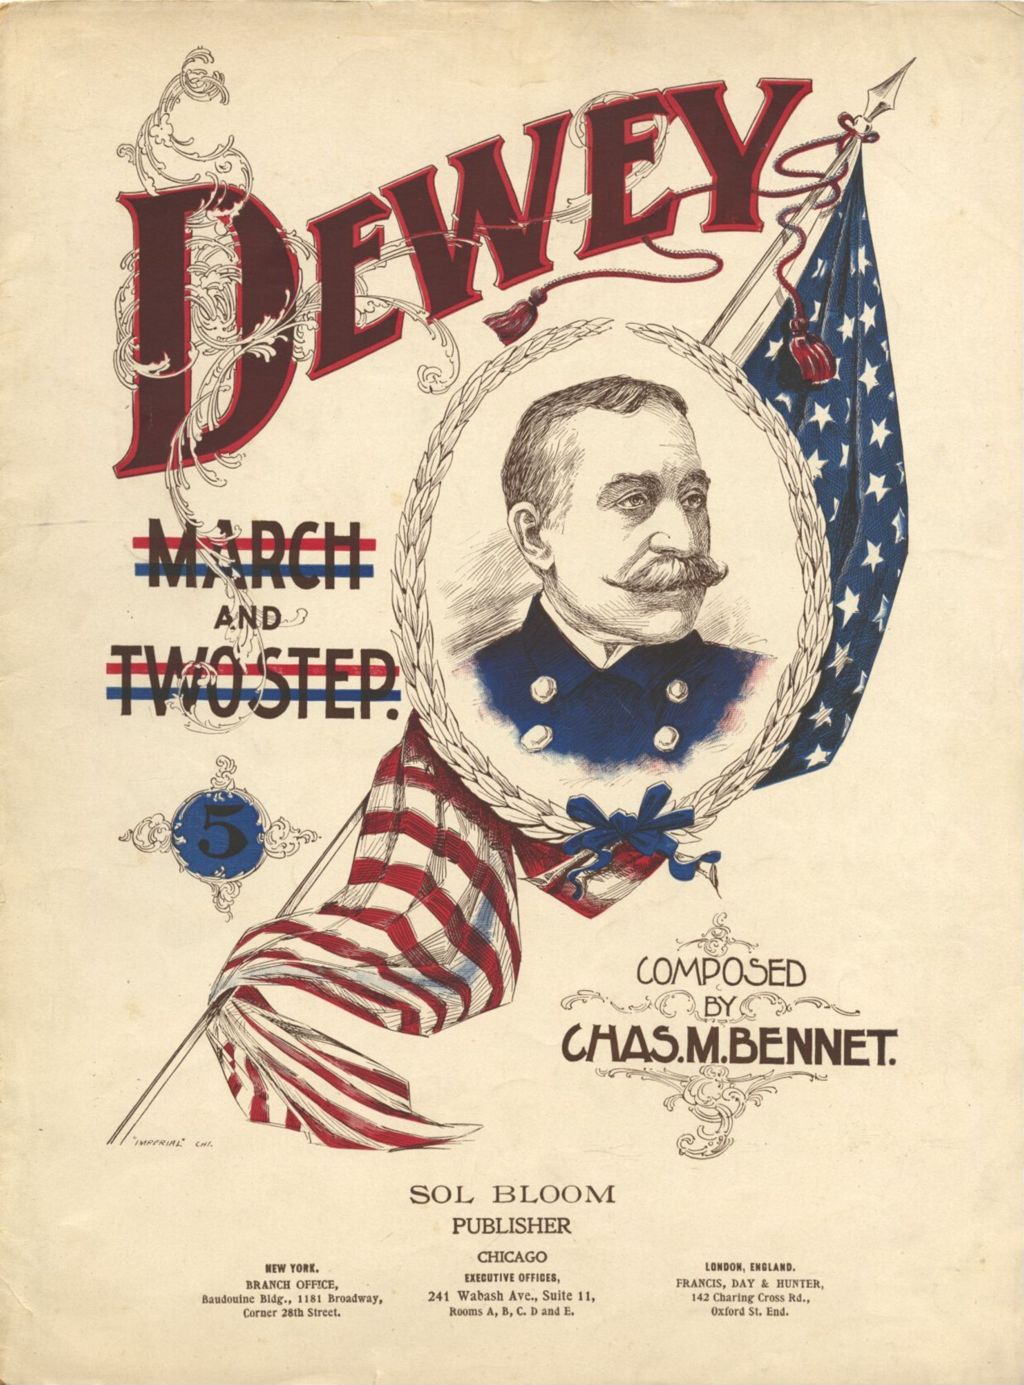 Miniature of Dewey March and Two-Step